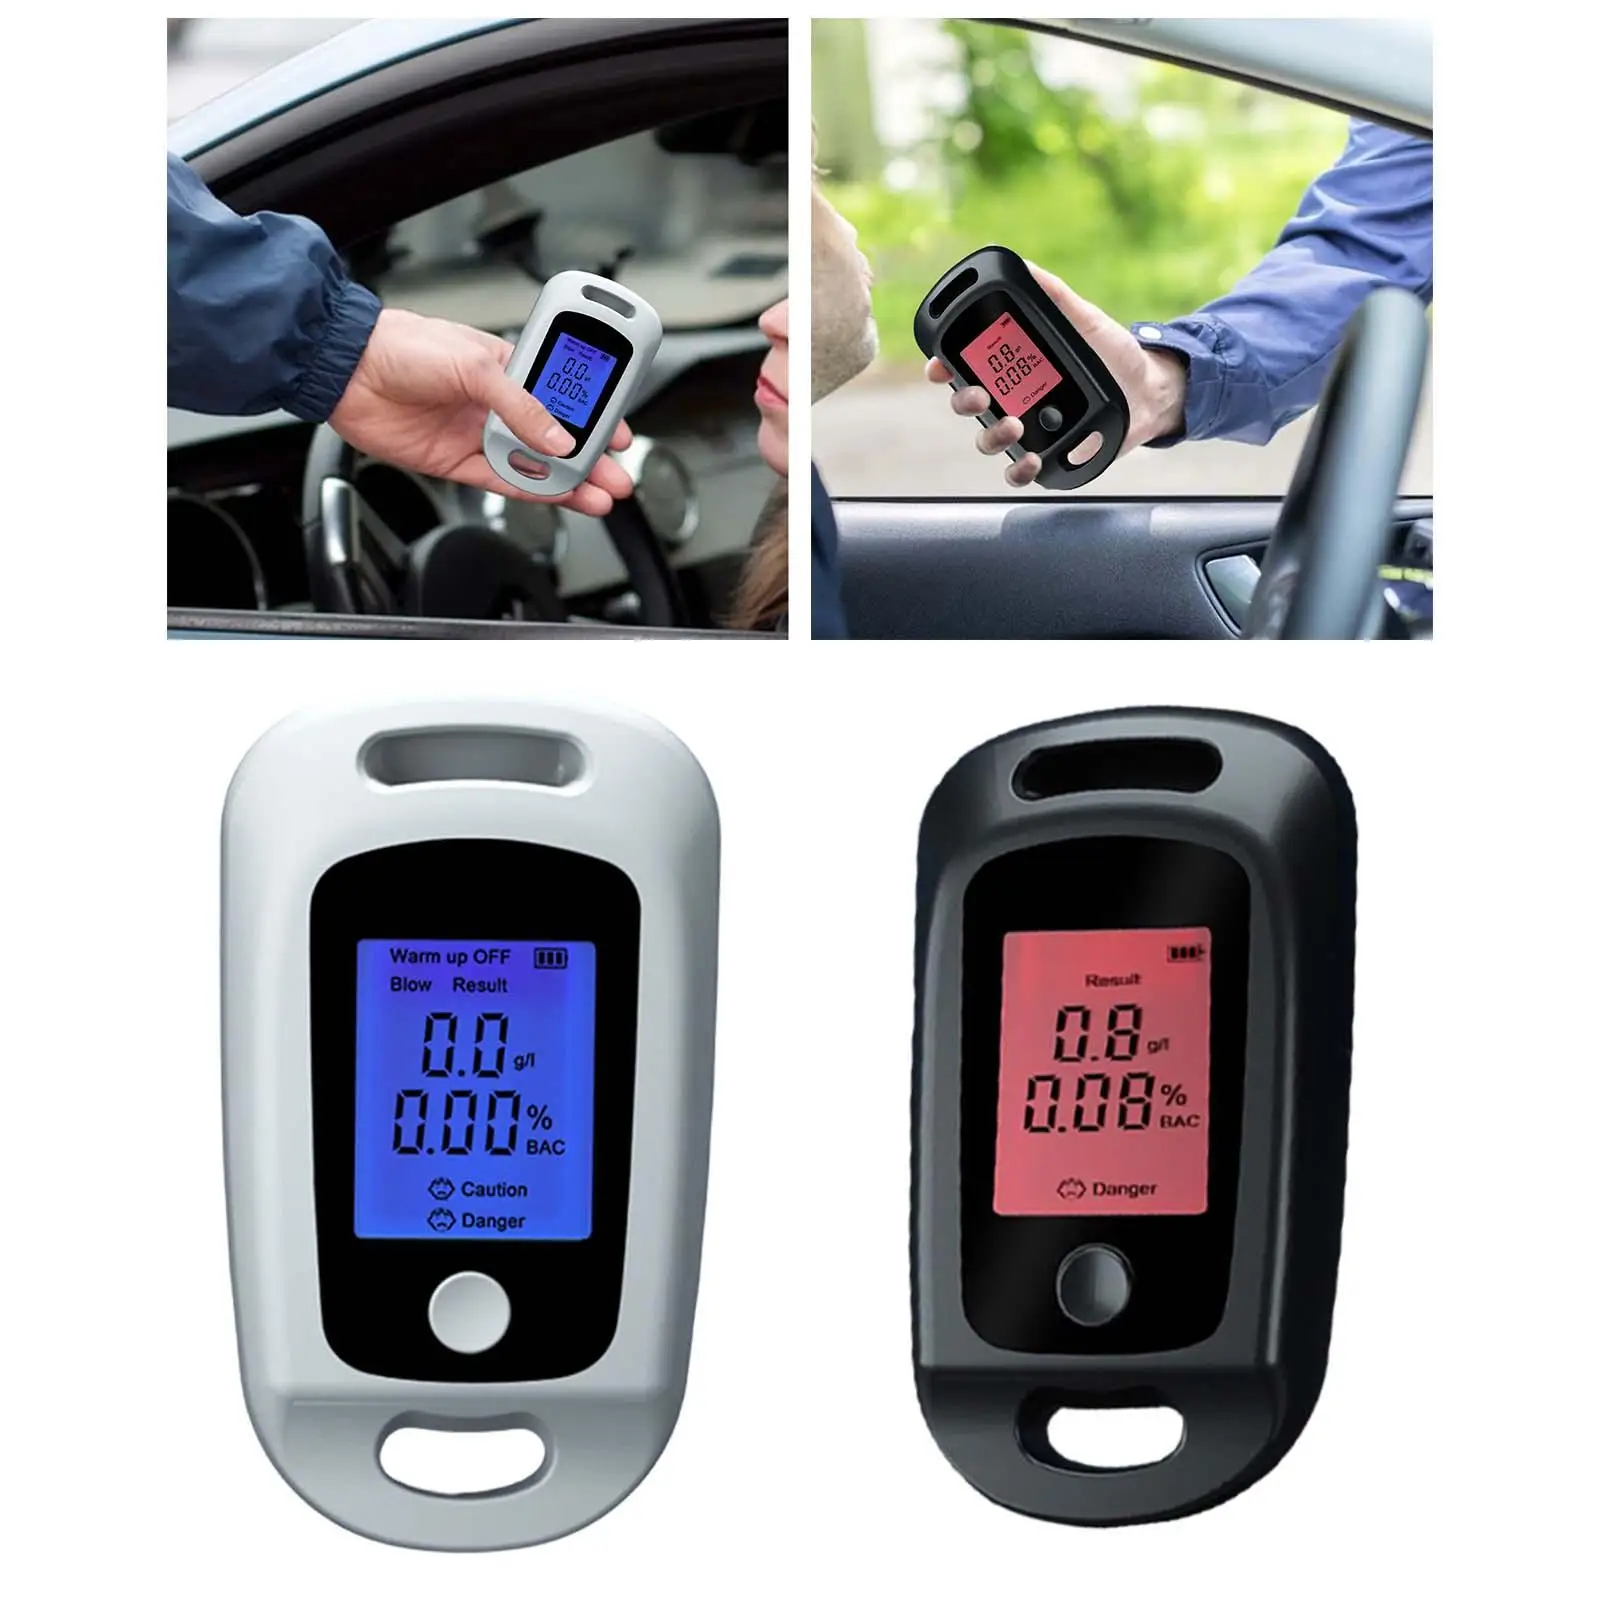 Alcohol Tester High Accuracy LCD Display Screen Breath Drunk Driving Analyzer for Drivers